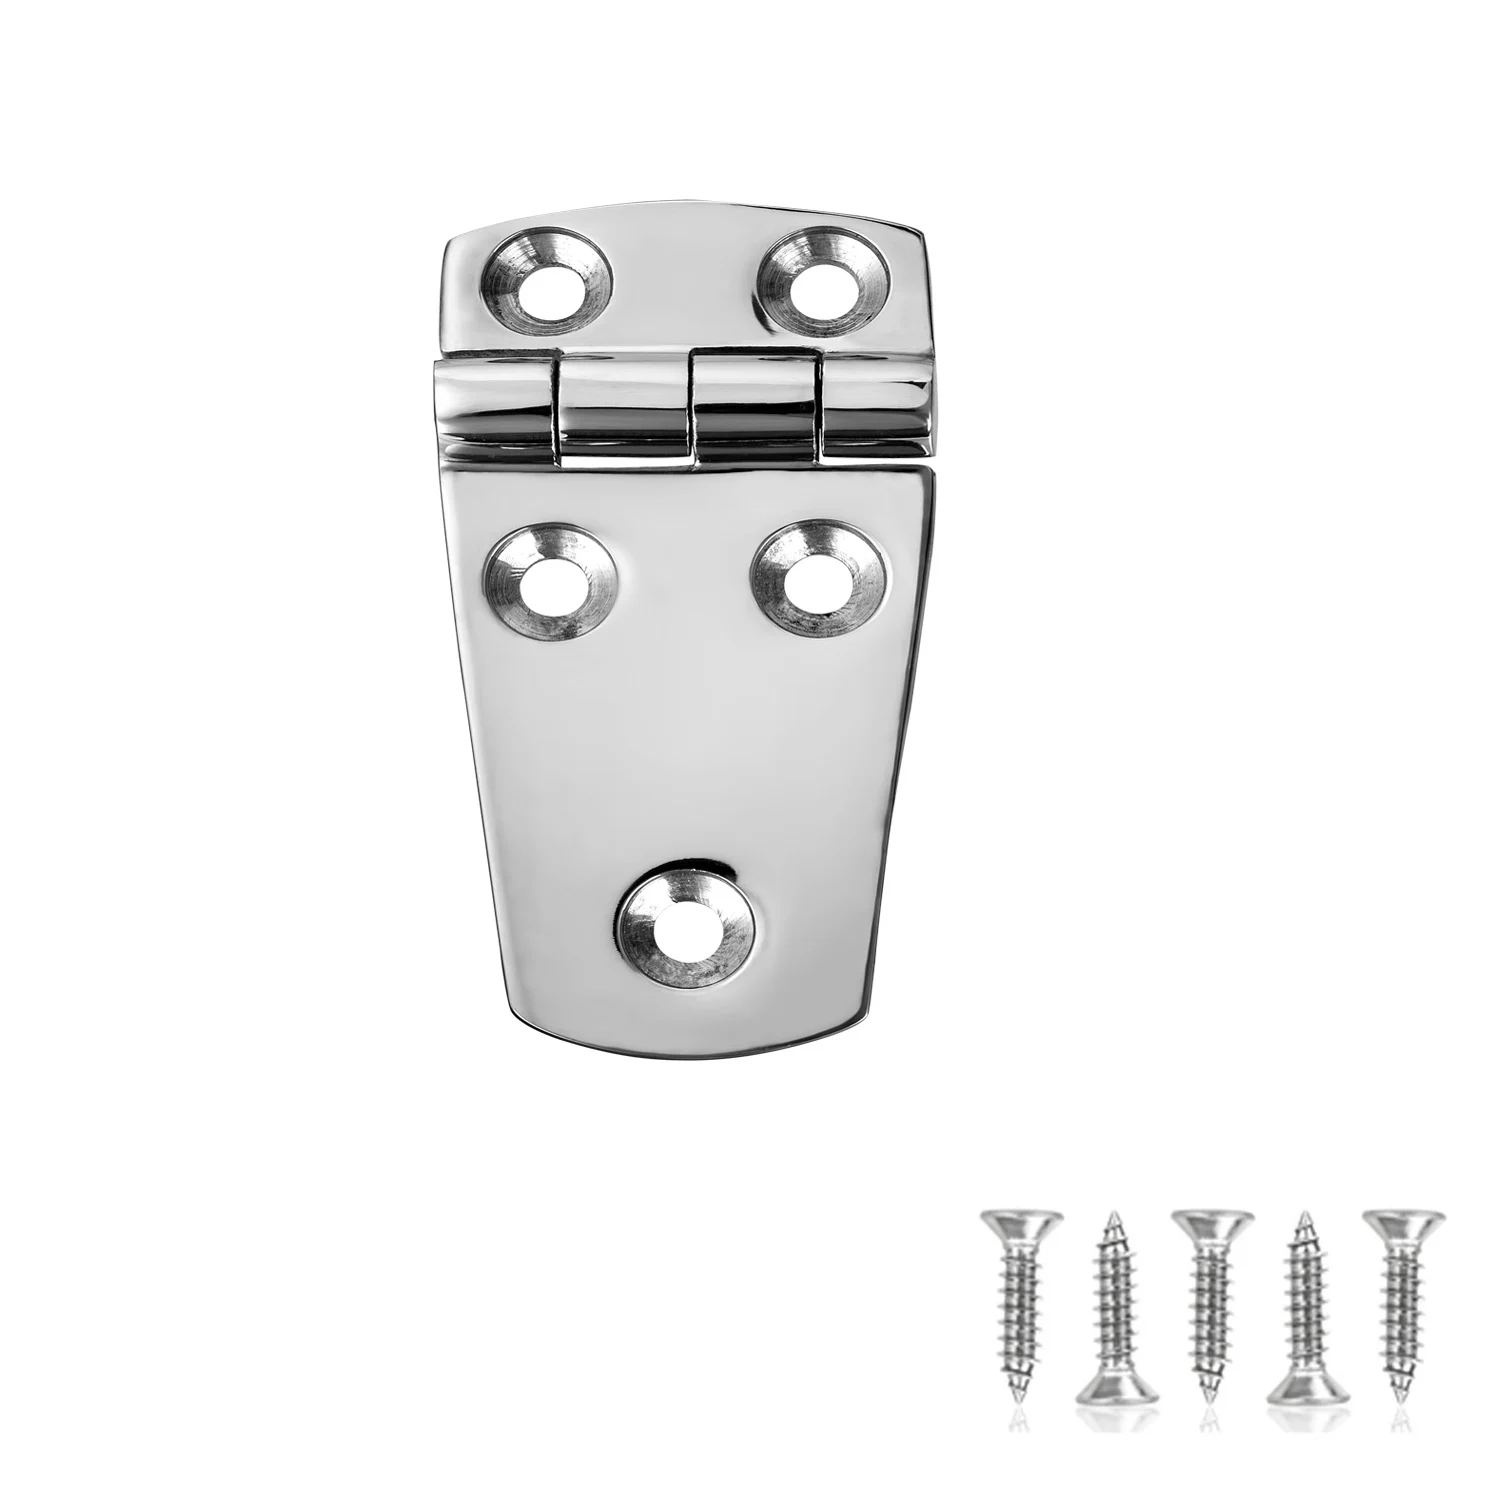 Marine Boat Hatch Hinges Stainless Steel, 3 Inch X 1.5 Inches(76 X 38MM) 5 Holes, No Noise, Heavy Duty 316 Ss with Screws 35mm hinge hole jig drill guide set with door hole opener concealed hinges guide door saw cabinet accessories tool